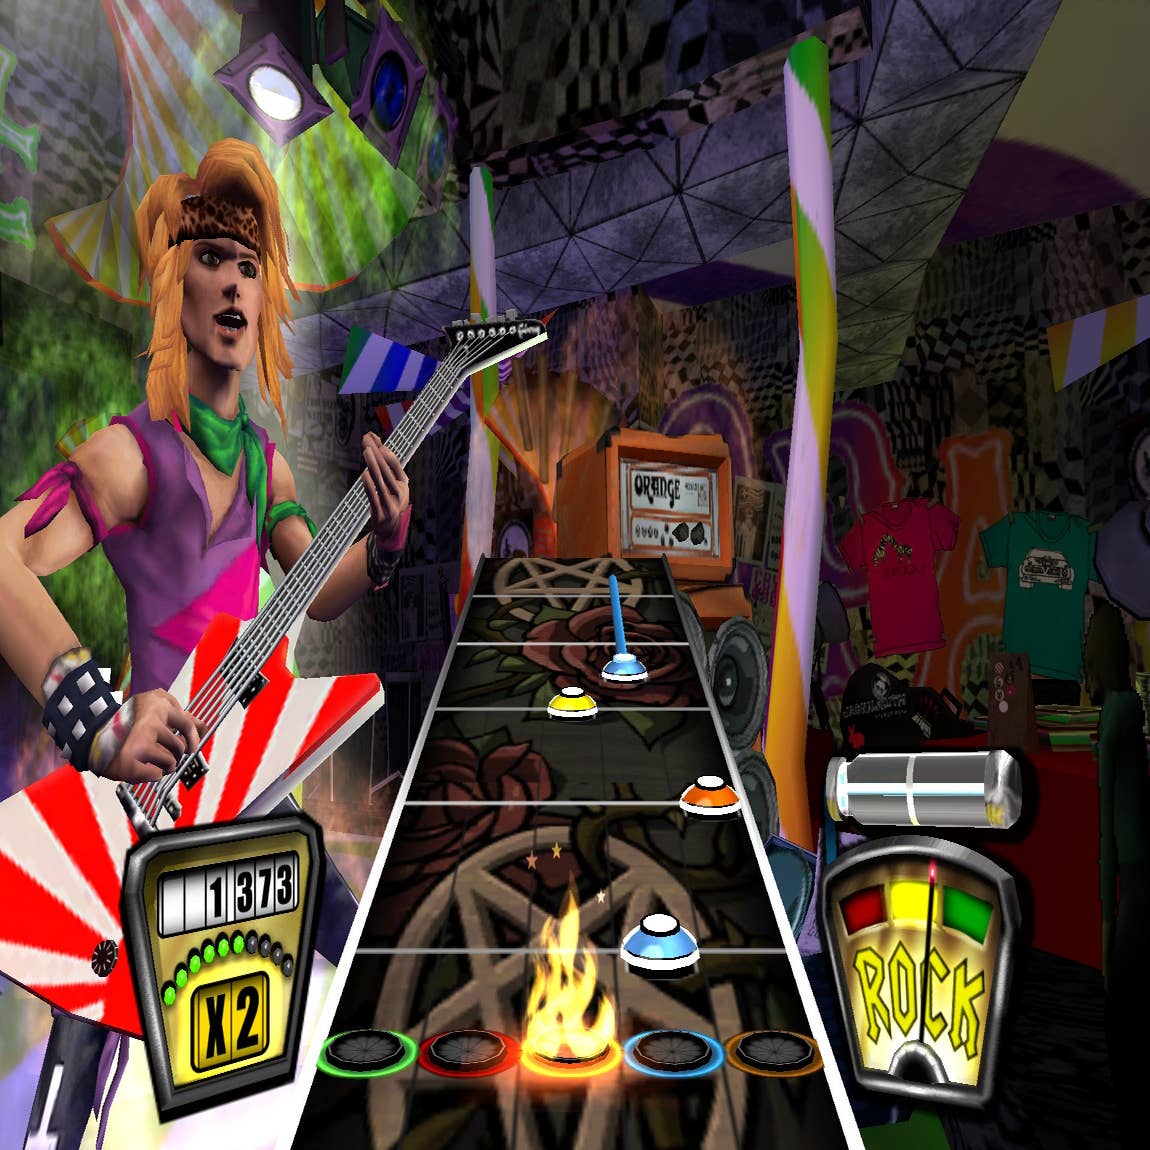 Can You Play Guitar Hero On PC? - Video Game Guitar